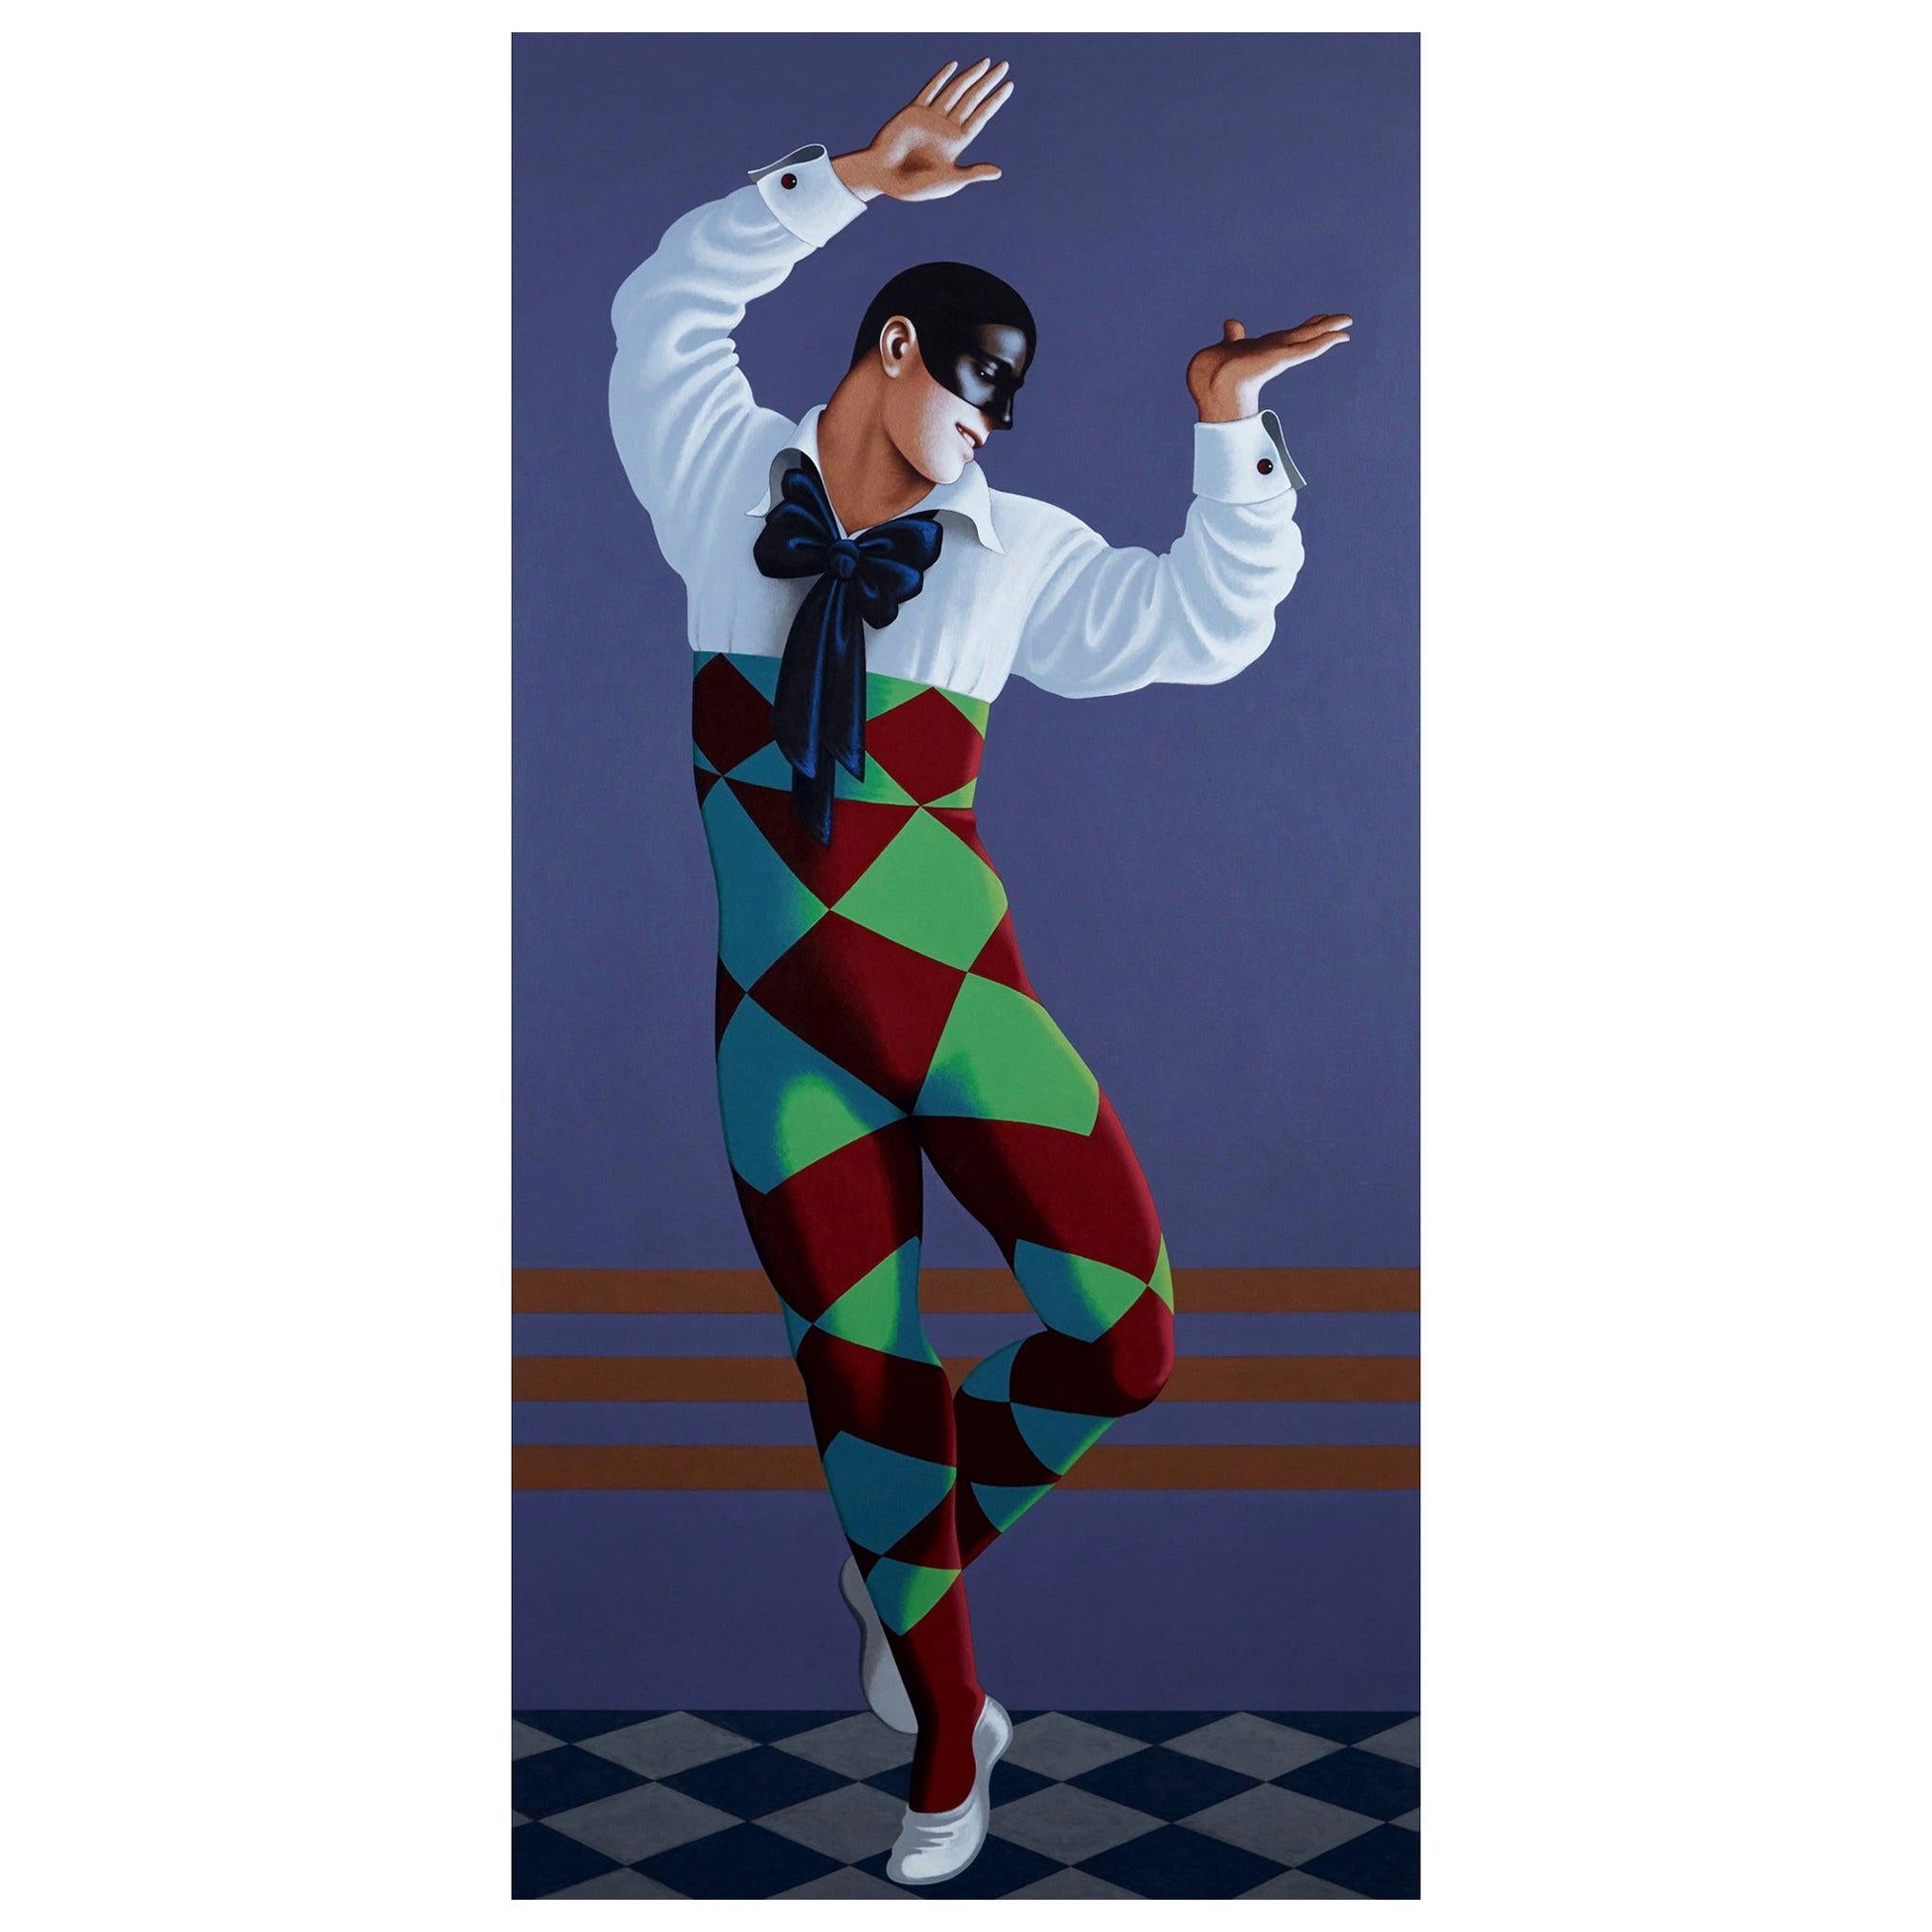 Nijinsky as Harlequin, Life-Size Painting by Lynn Curlee For Sale